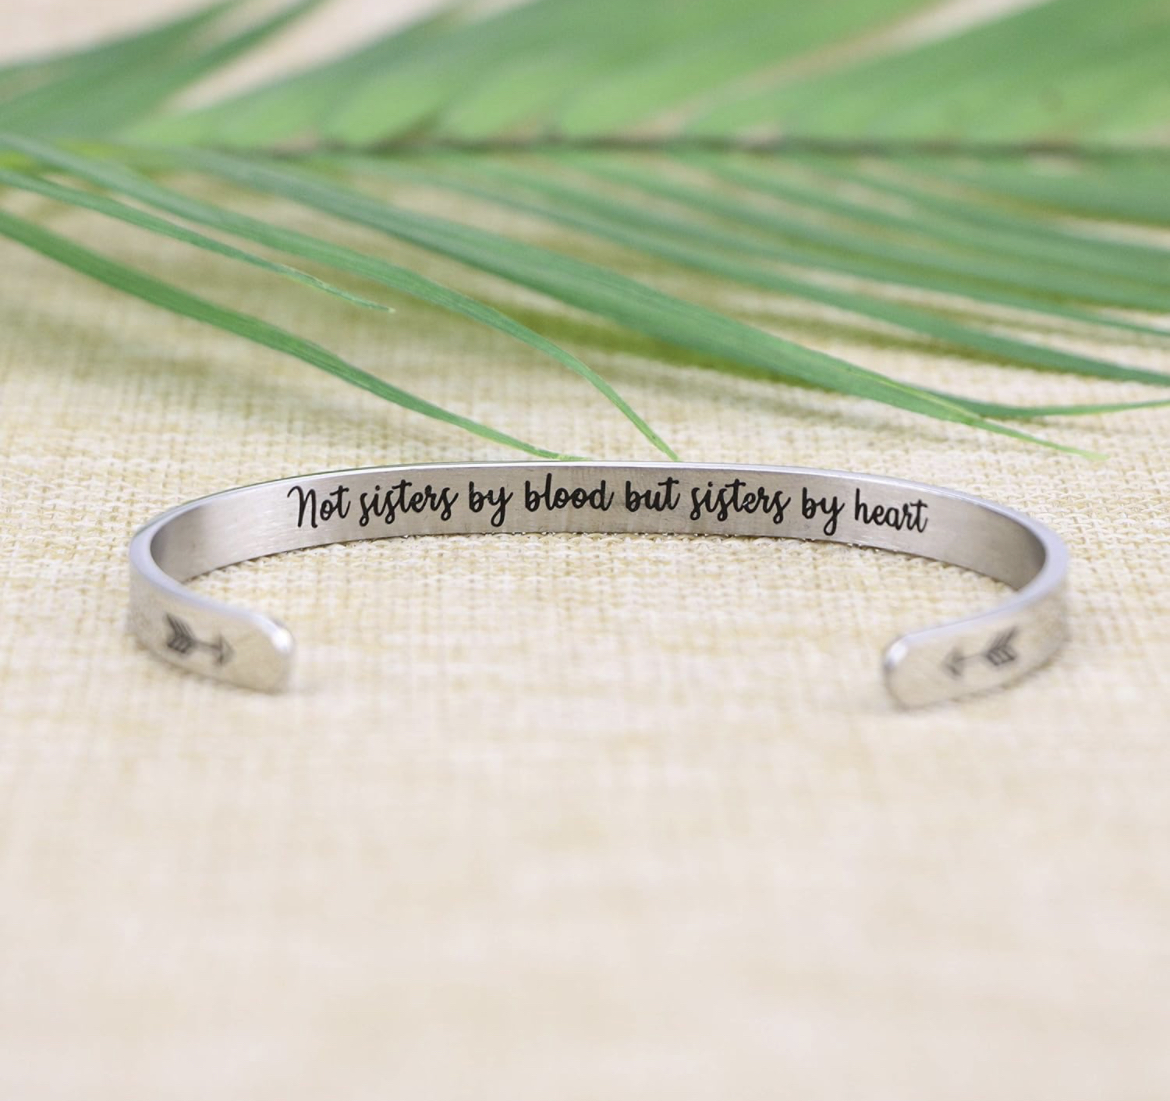 not sisters by blood but sisters by heart cuff bangle bracelet on amazon. Best friend gifts. Gift ideas for best friend. BFF gift ideas. Bestie gift ideas. Gift Ideas for a special friend. Gift ideas for sister. Gift ideas for female best friends. Presents for best friend. Unique best friend gifts. Meaningful gift ideas. Thoughtful presents